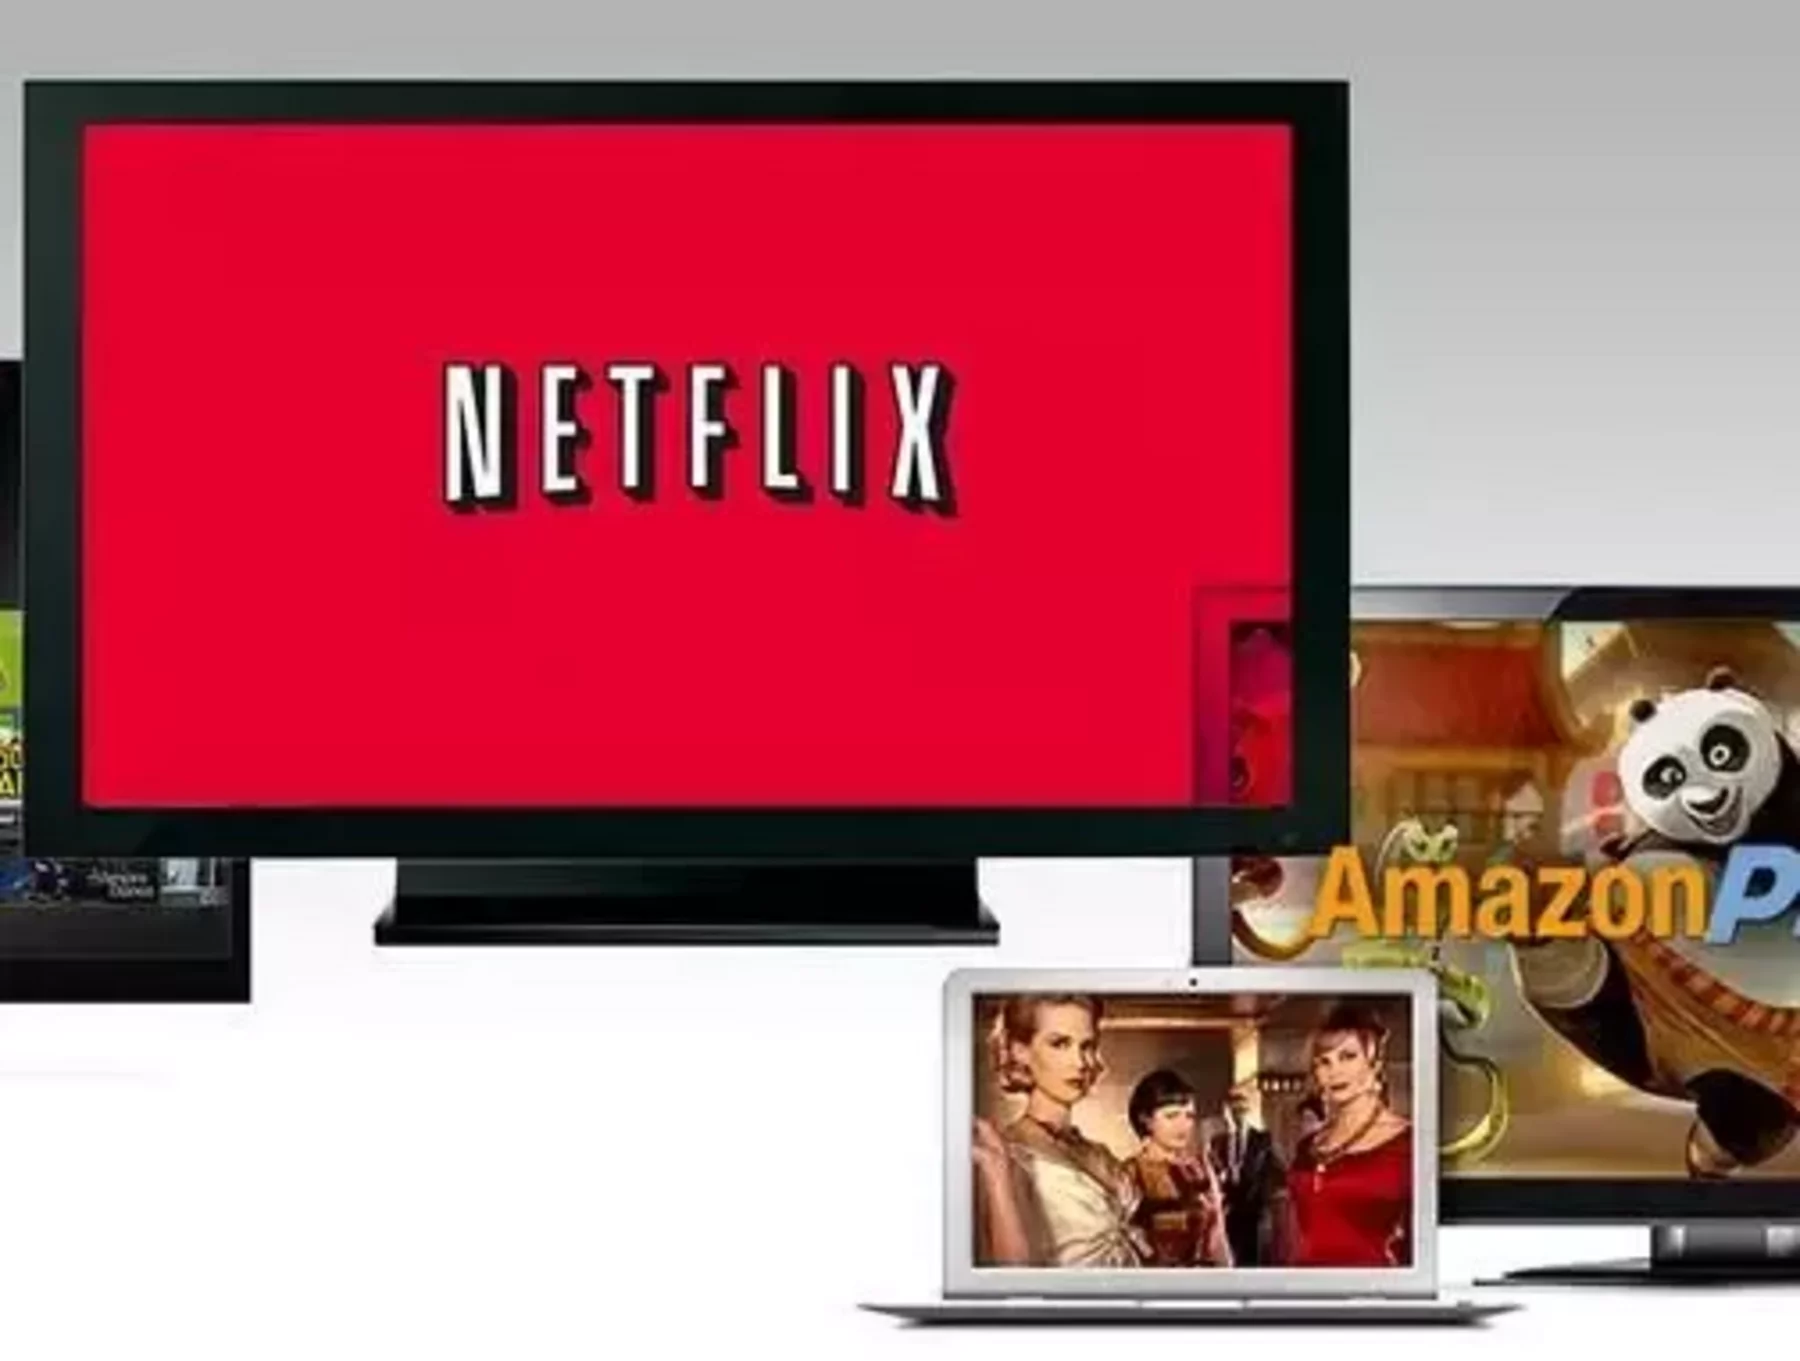 Amazon video-on-demand services enters Kenya market Business Chief UK and Europe